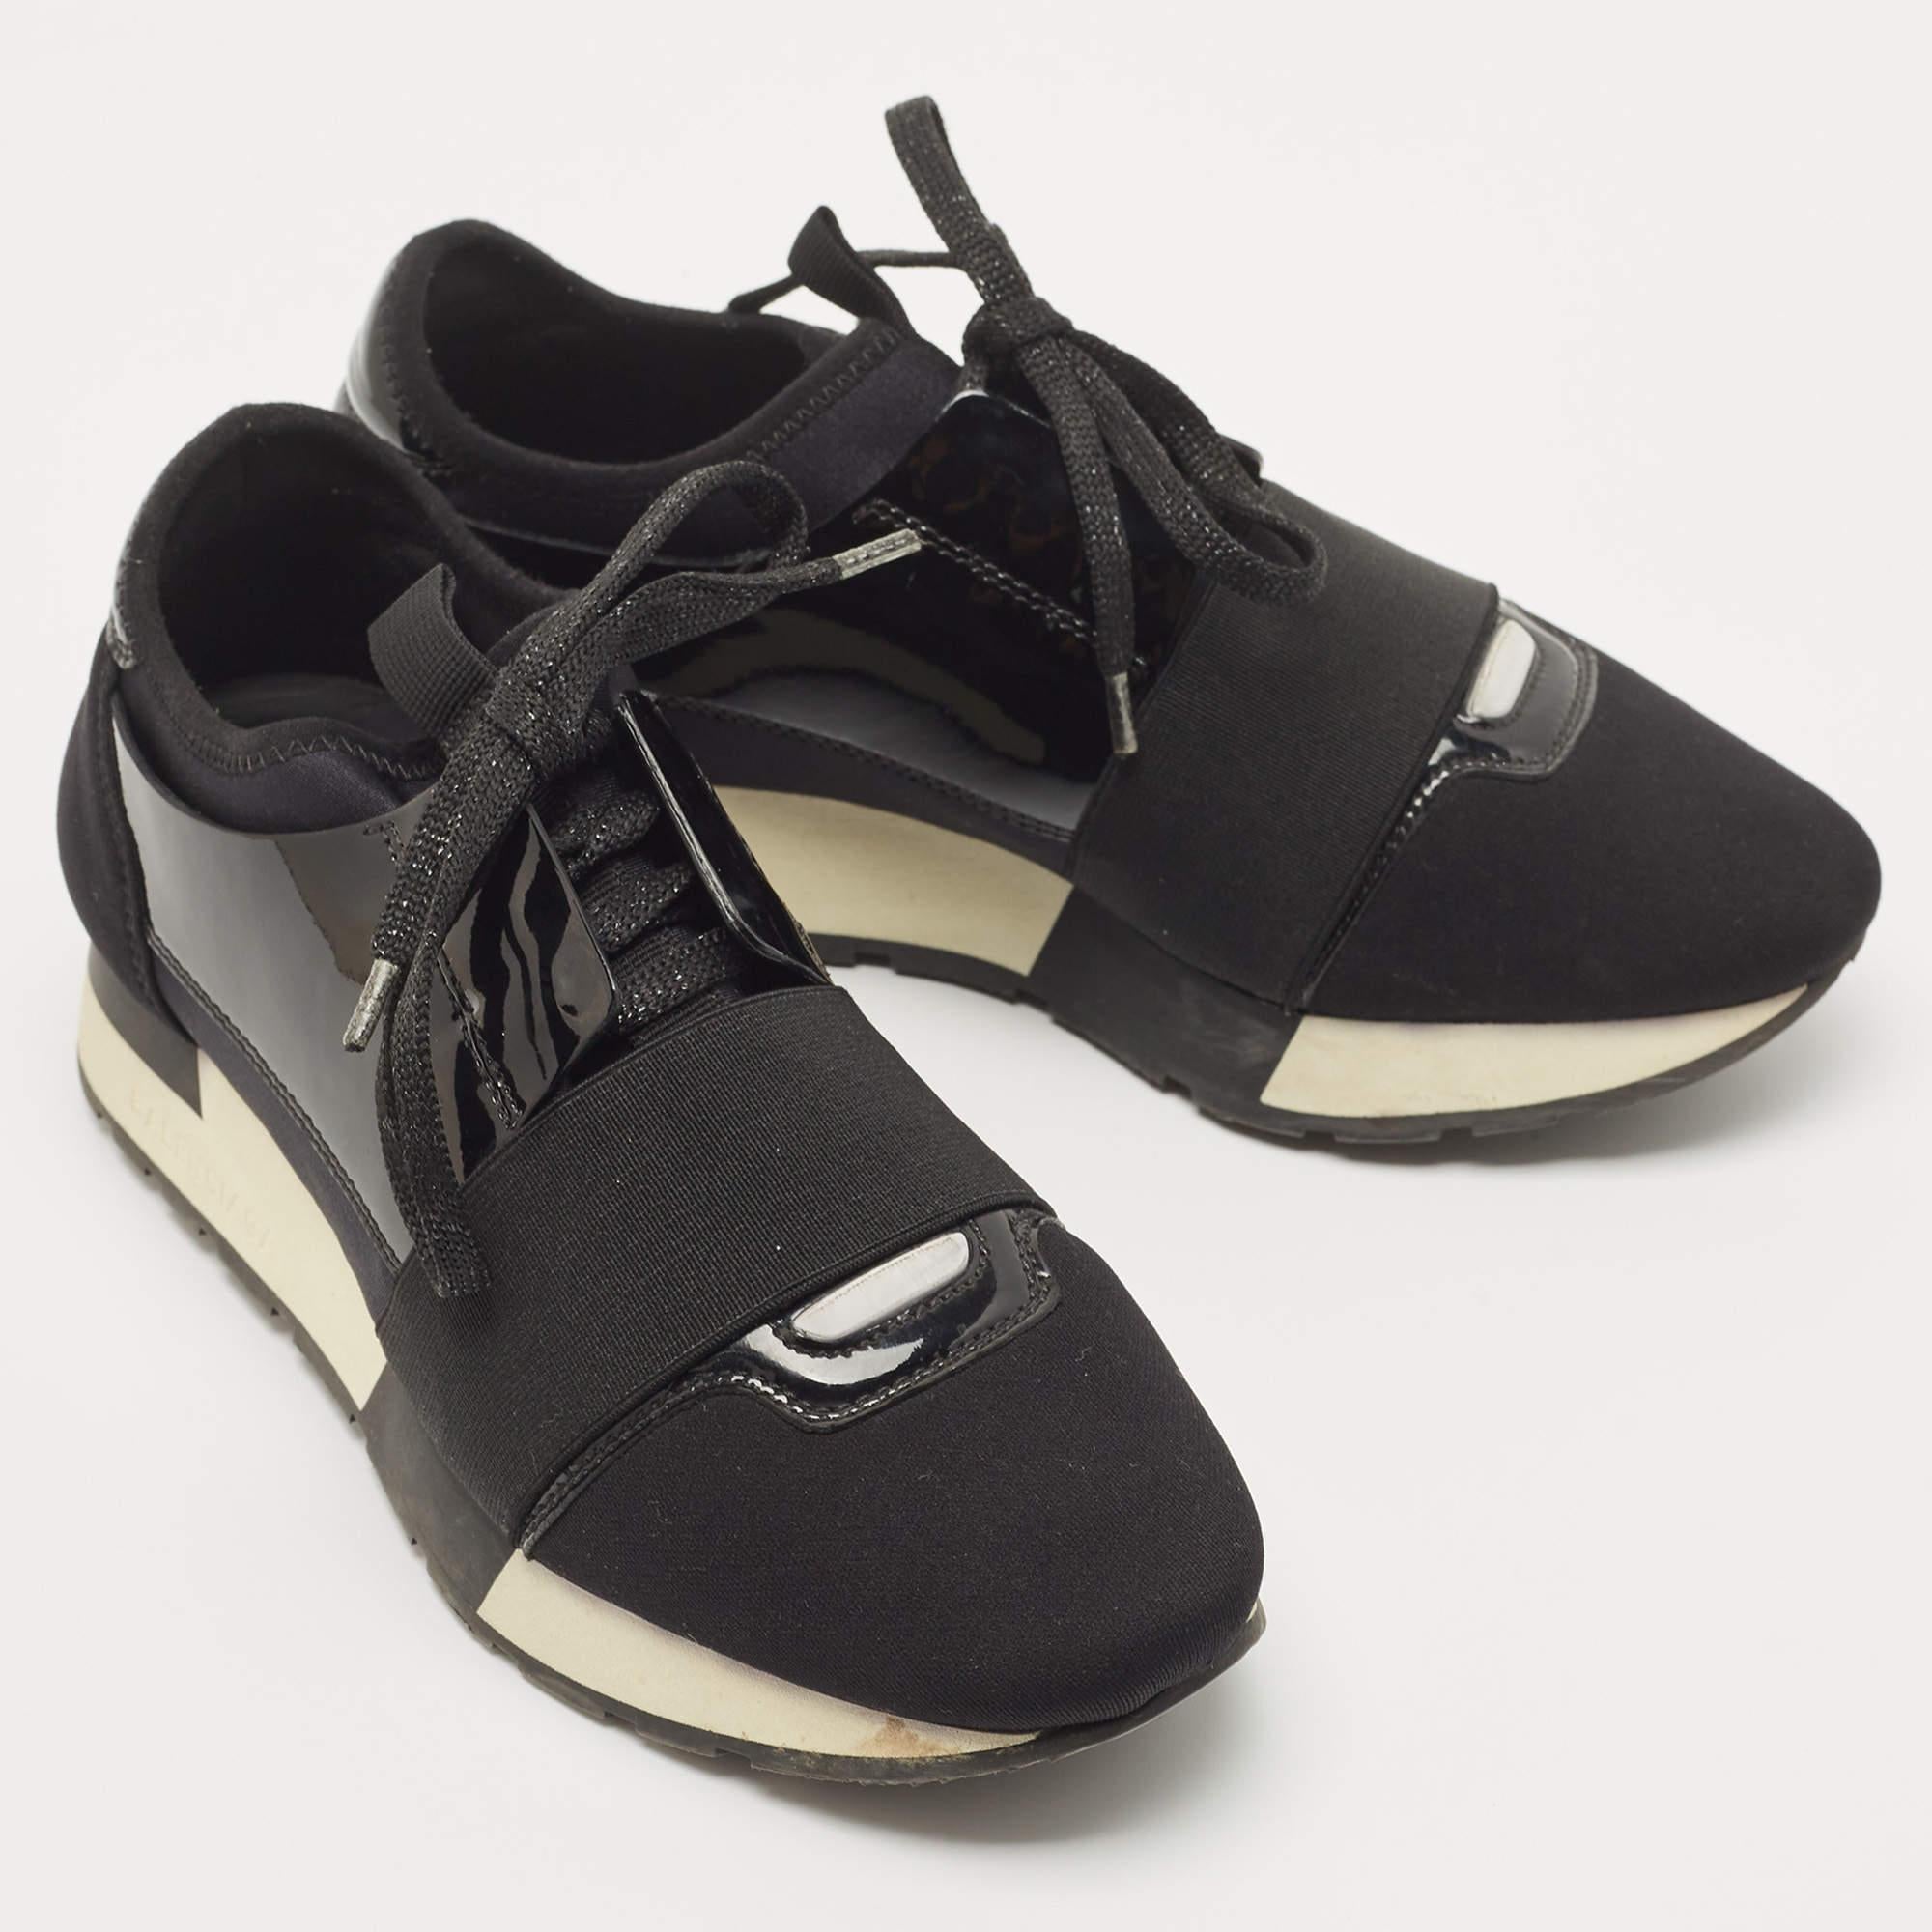 The Balenciaga Race Runner sneakers have been crafted from quality materials and feature a chic silhouette. They flaunt covered toes, strap detailing on the vamps, and tie-up fastenings. They are complete with a leather-lined insole and a tough base